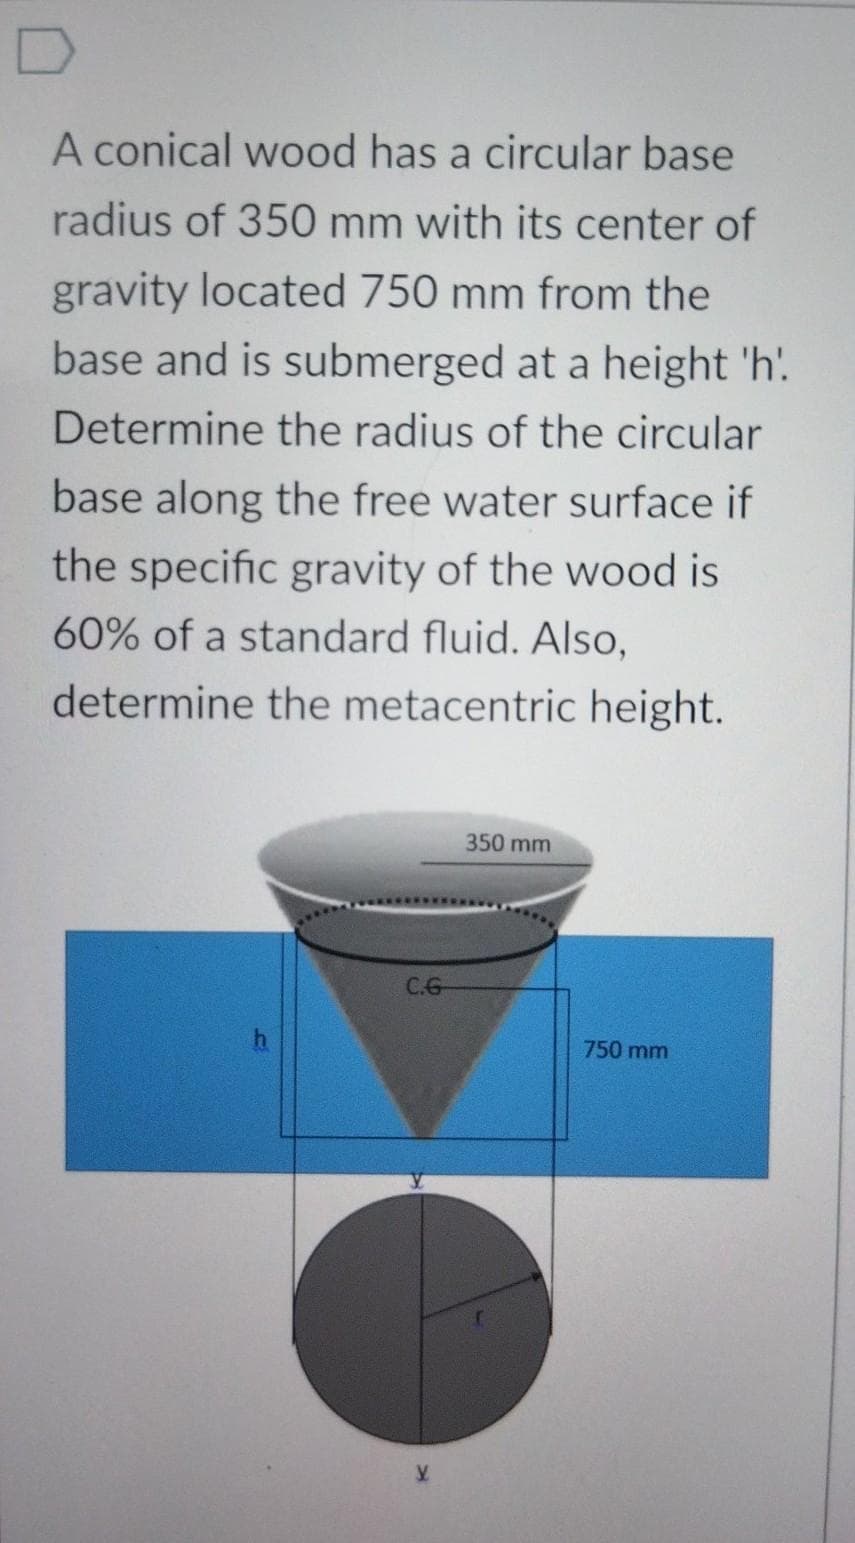 A conical wood has a circular base
radius of 350 mm with its center of
gravity located 750 mm from the
base and is submerged at a height 'h'.
Determine the radius of the circular
base along the free water surface if
the specific gravity of the wood is
60% of a standard fluid. Also,
determine the metacentric height.
350 mm
C.G
750 mm
